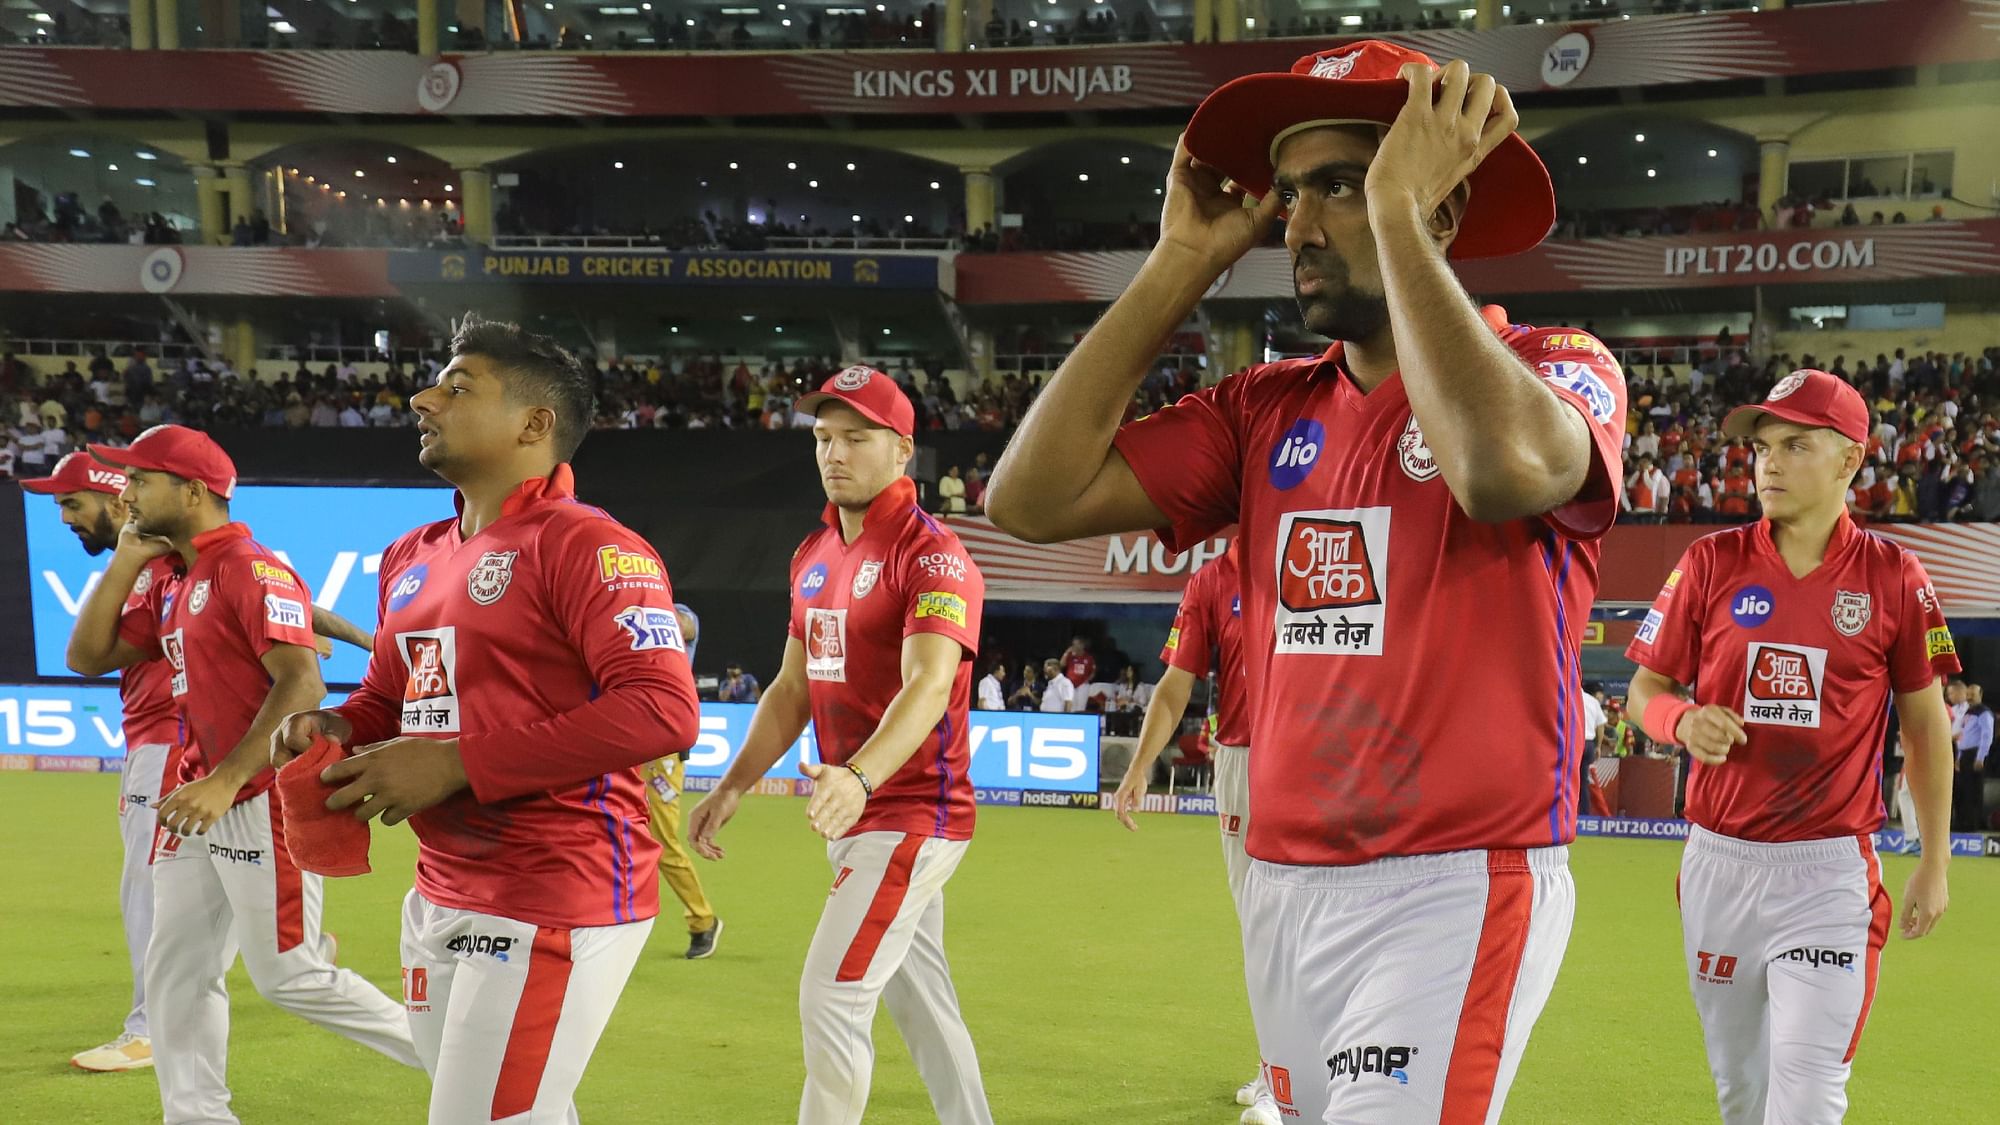 The R Ashwin led Kings XI slipped to number fifth spot after suffering back-to-back losses against Mumbai Indians and Royal Challengers Bangalore.